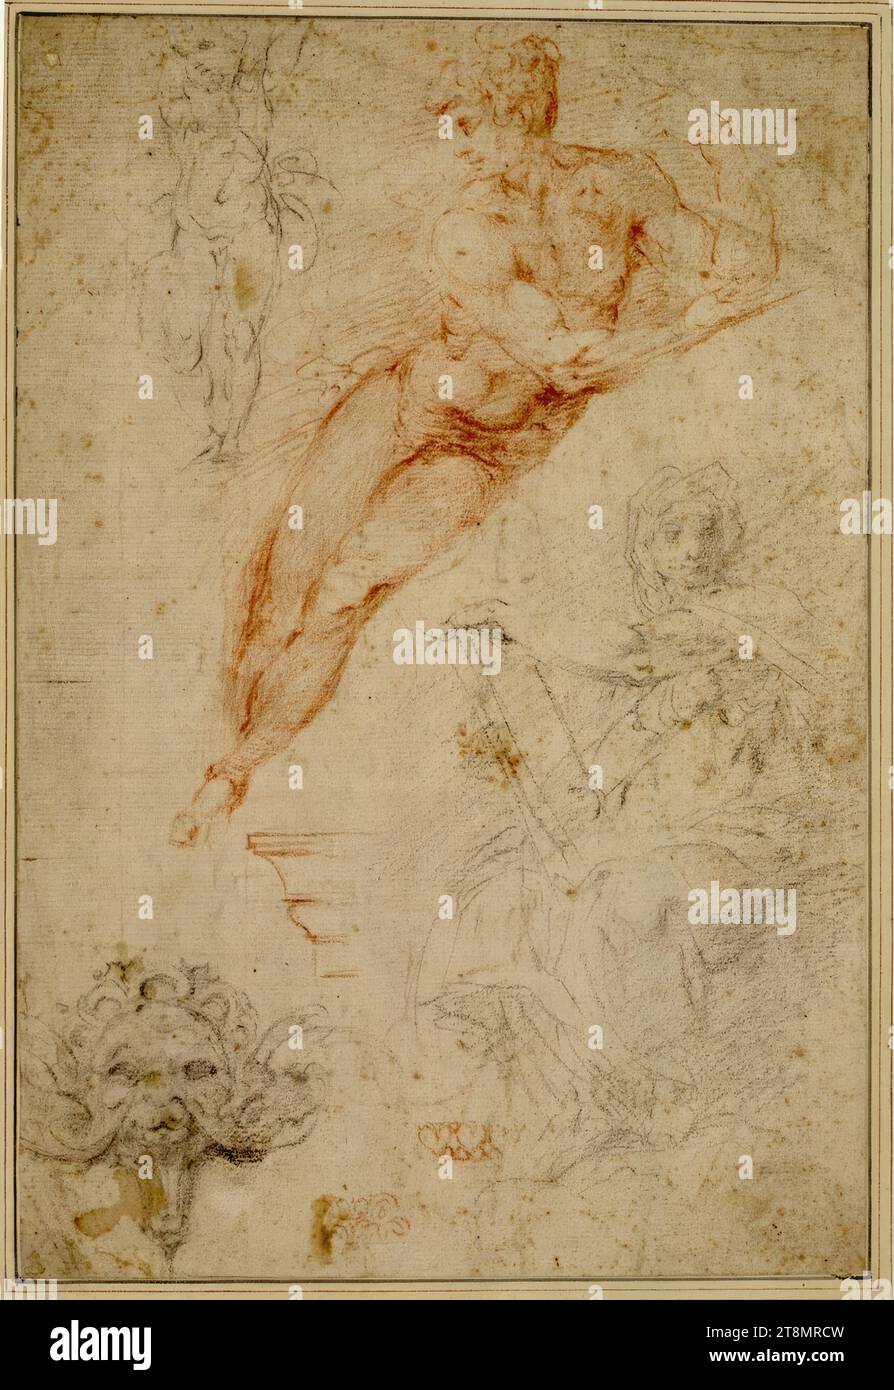 Study sheet after Michelangelo's ceiling of the Sistine Chapel. (One of the youths in bronze above Judith; one of the stone-colored putti; the Delphic Sibyl; decorative details), Giovanni Battista Naldini (Fiesole around 1537 - 1591 Florence), drawing, red chalk; Chalk, 32 x 21.5 cm, l.l. Duke Albert of Saxe-Teschen Stock Photo